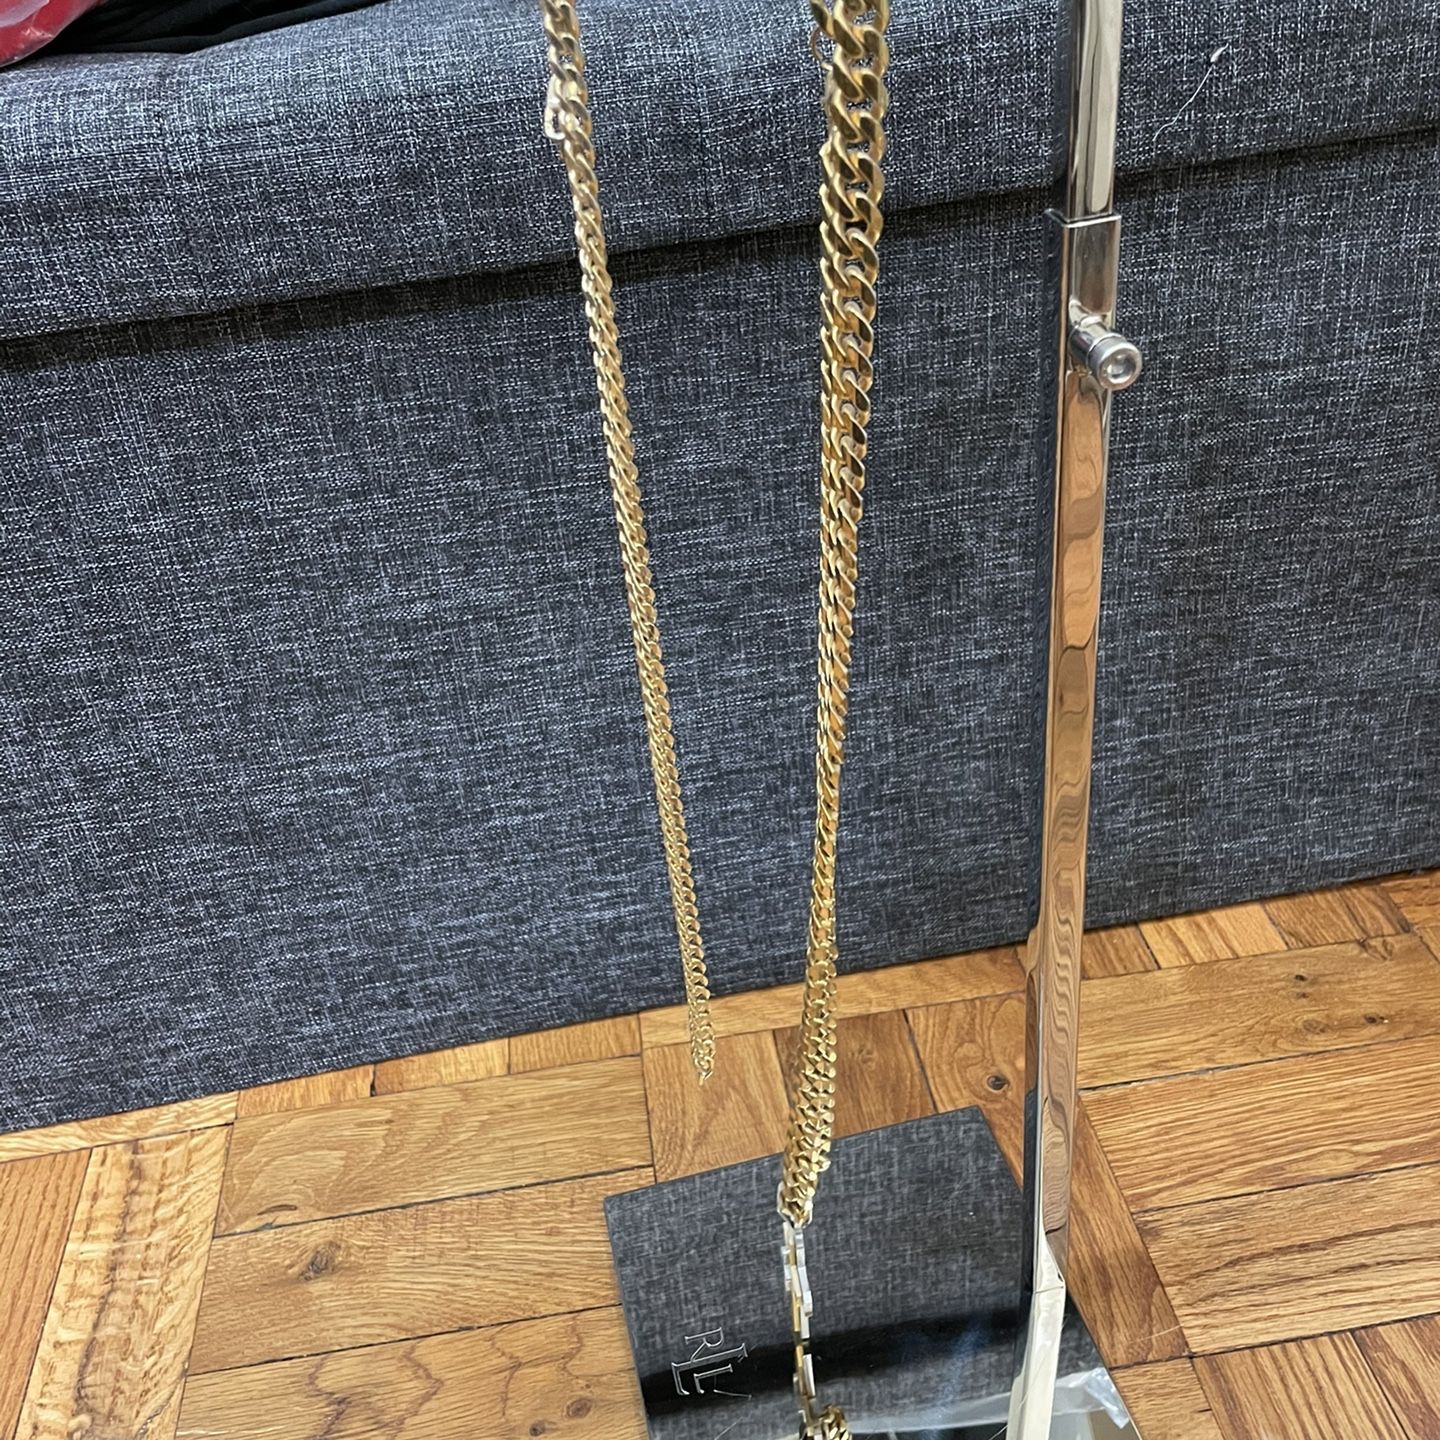 Ralph Lauren Necklace Display Holder(Chains not included)